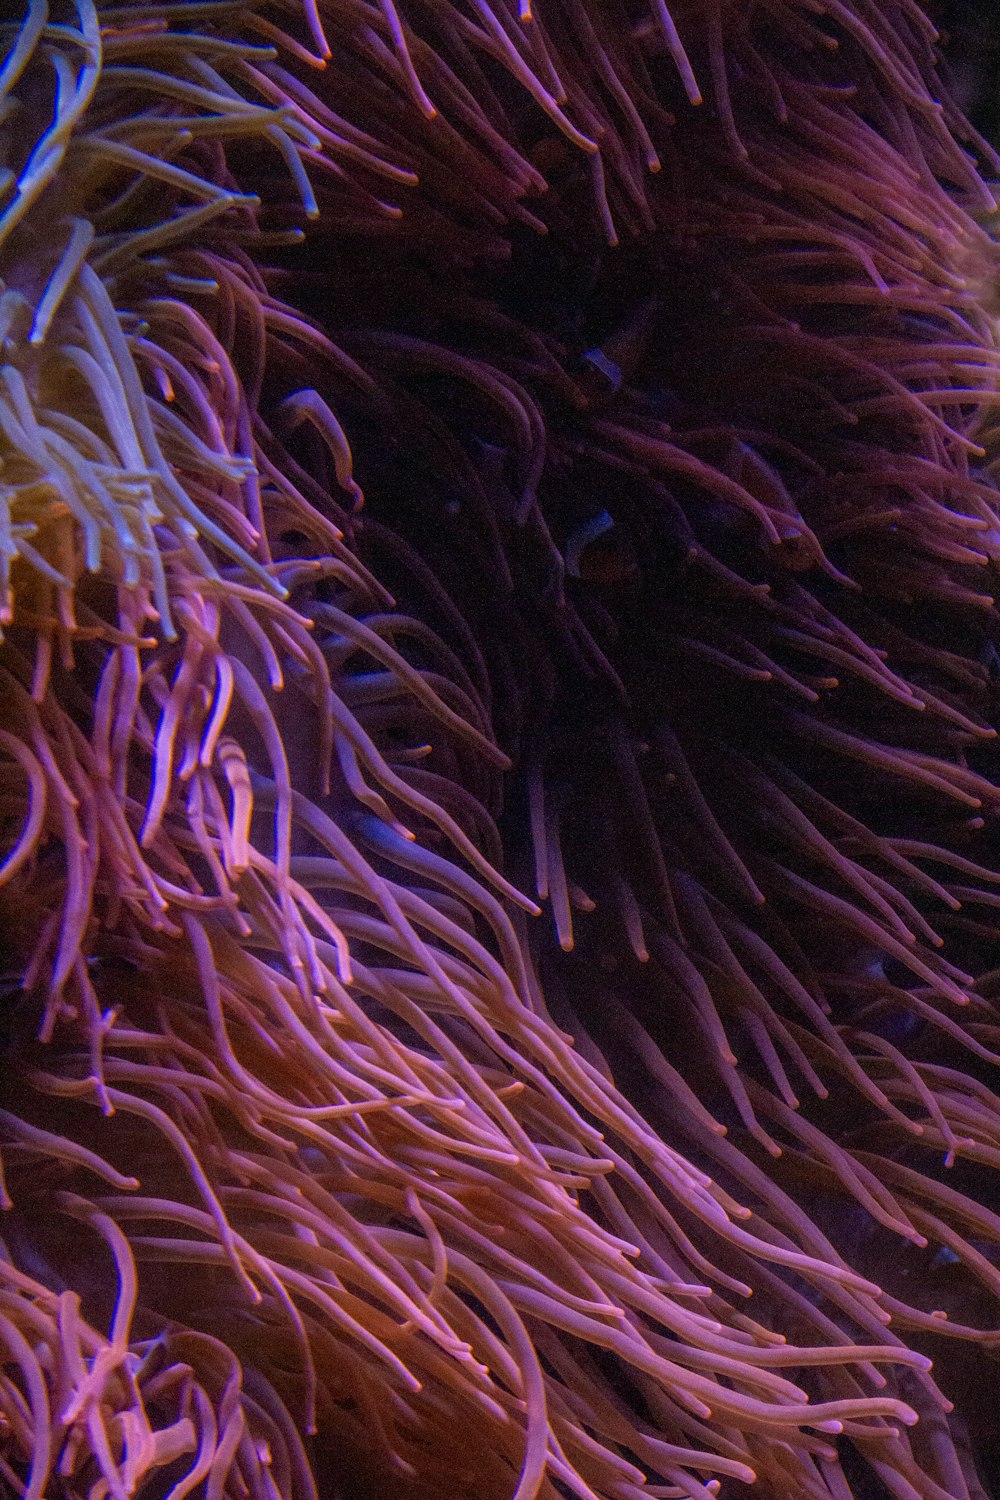 a close up of a purple and white sea anemone